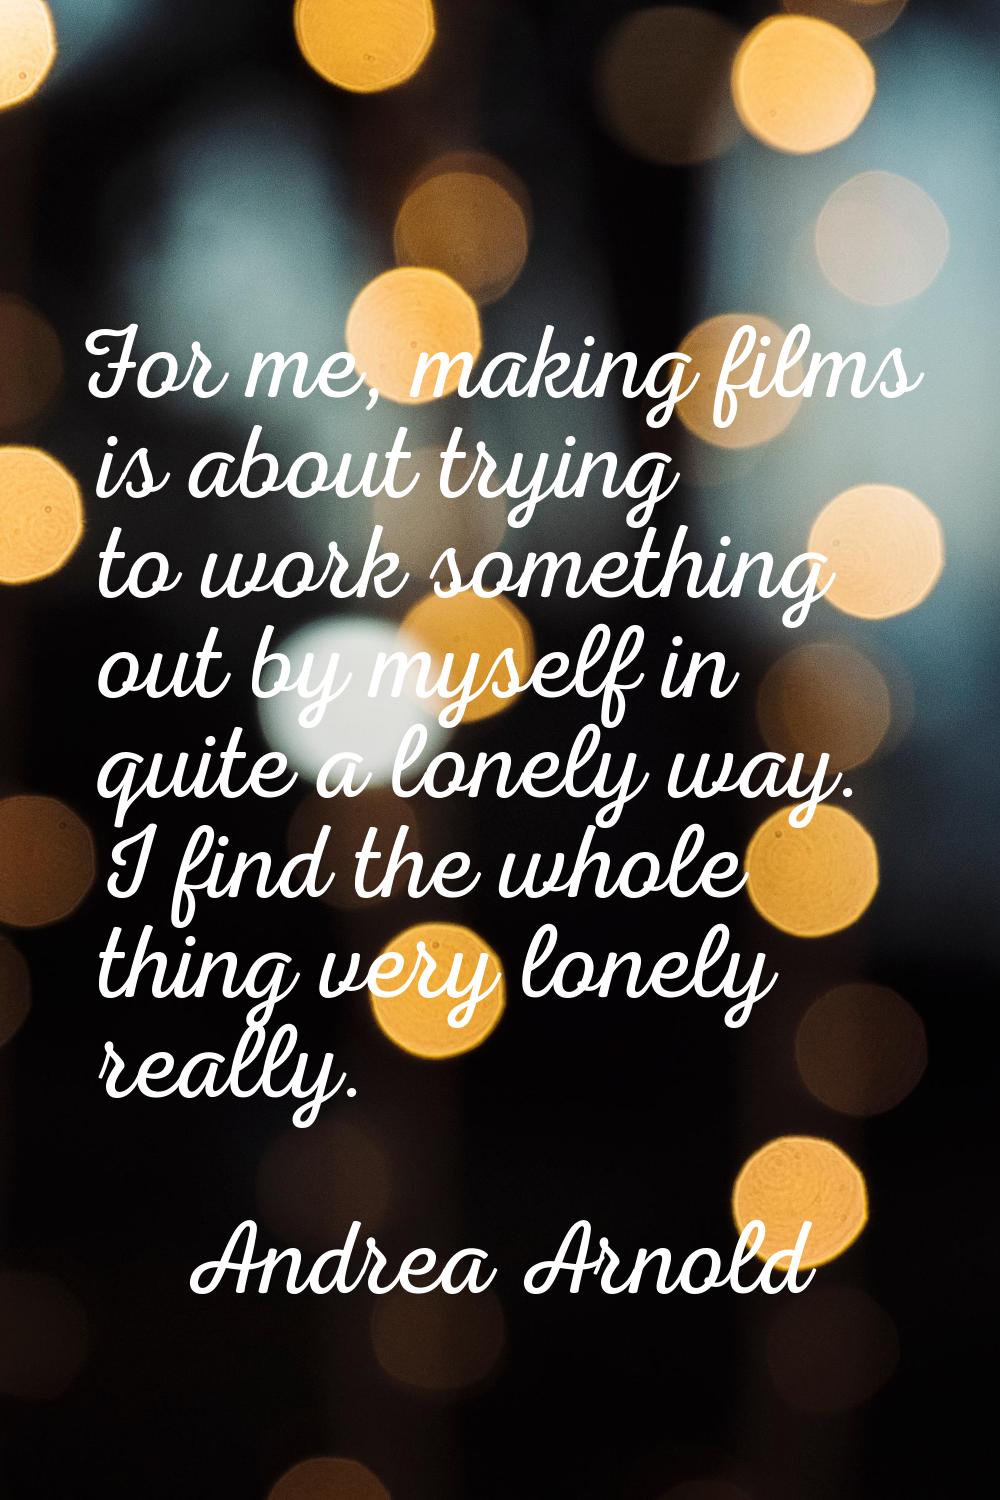 For me, making films is about trying to work something out by myself in quite a lonely way. I find 